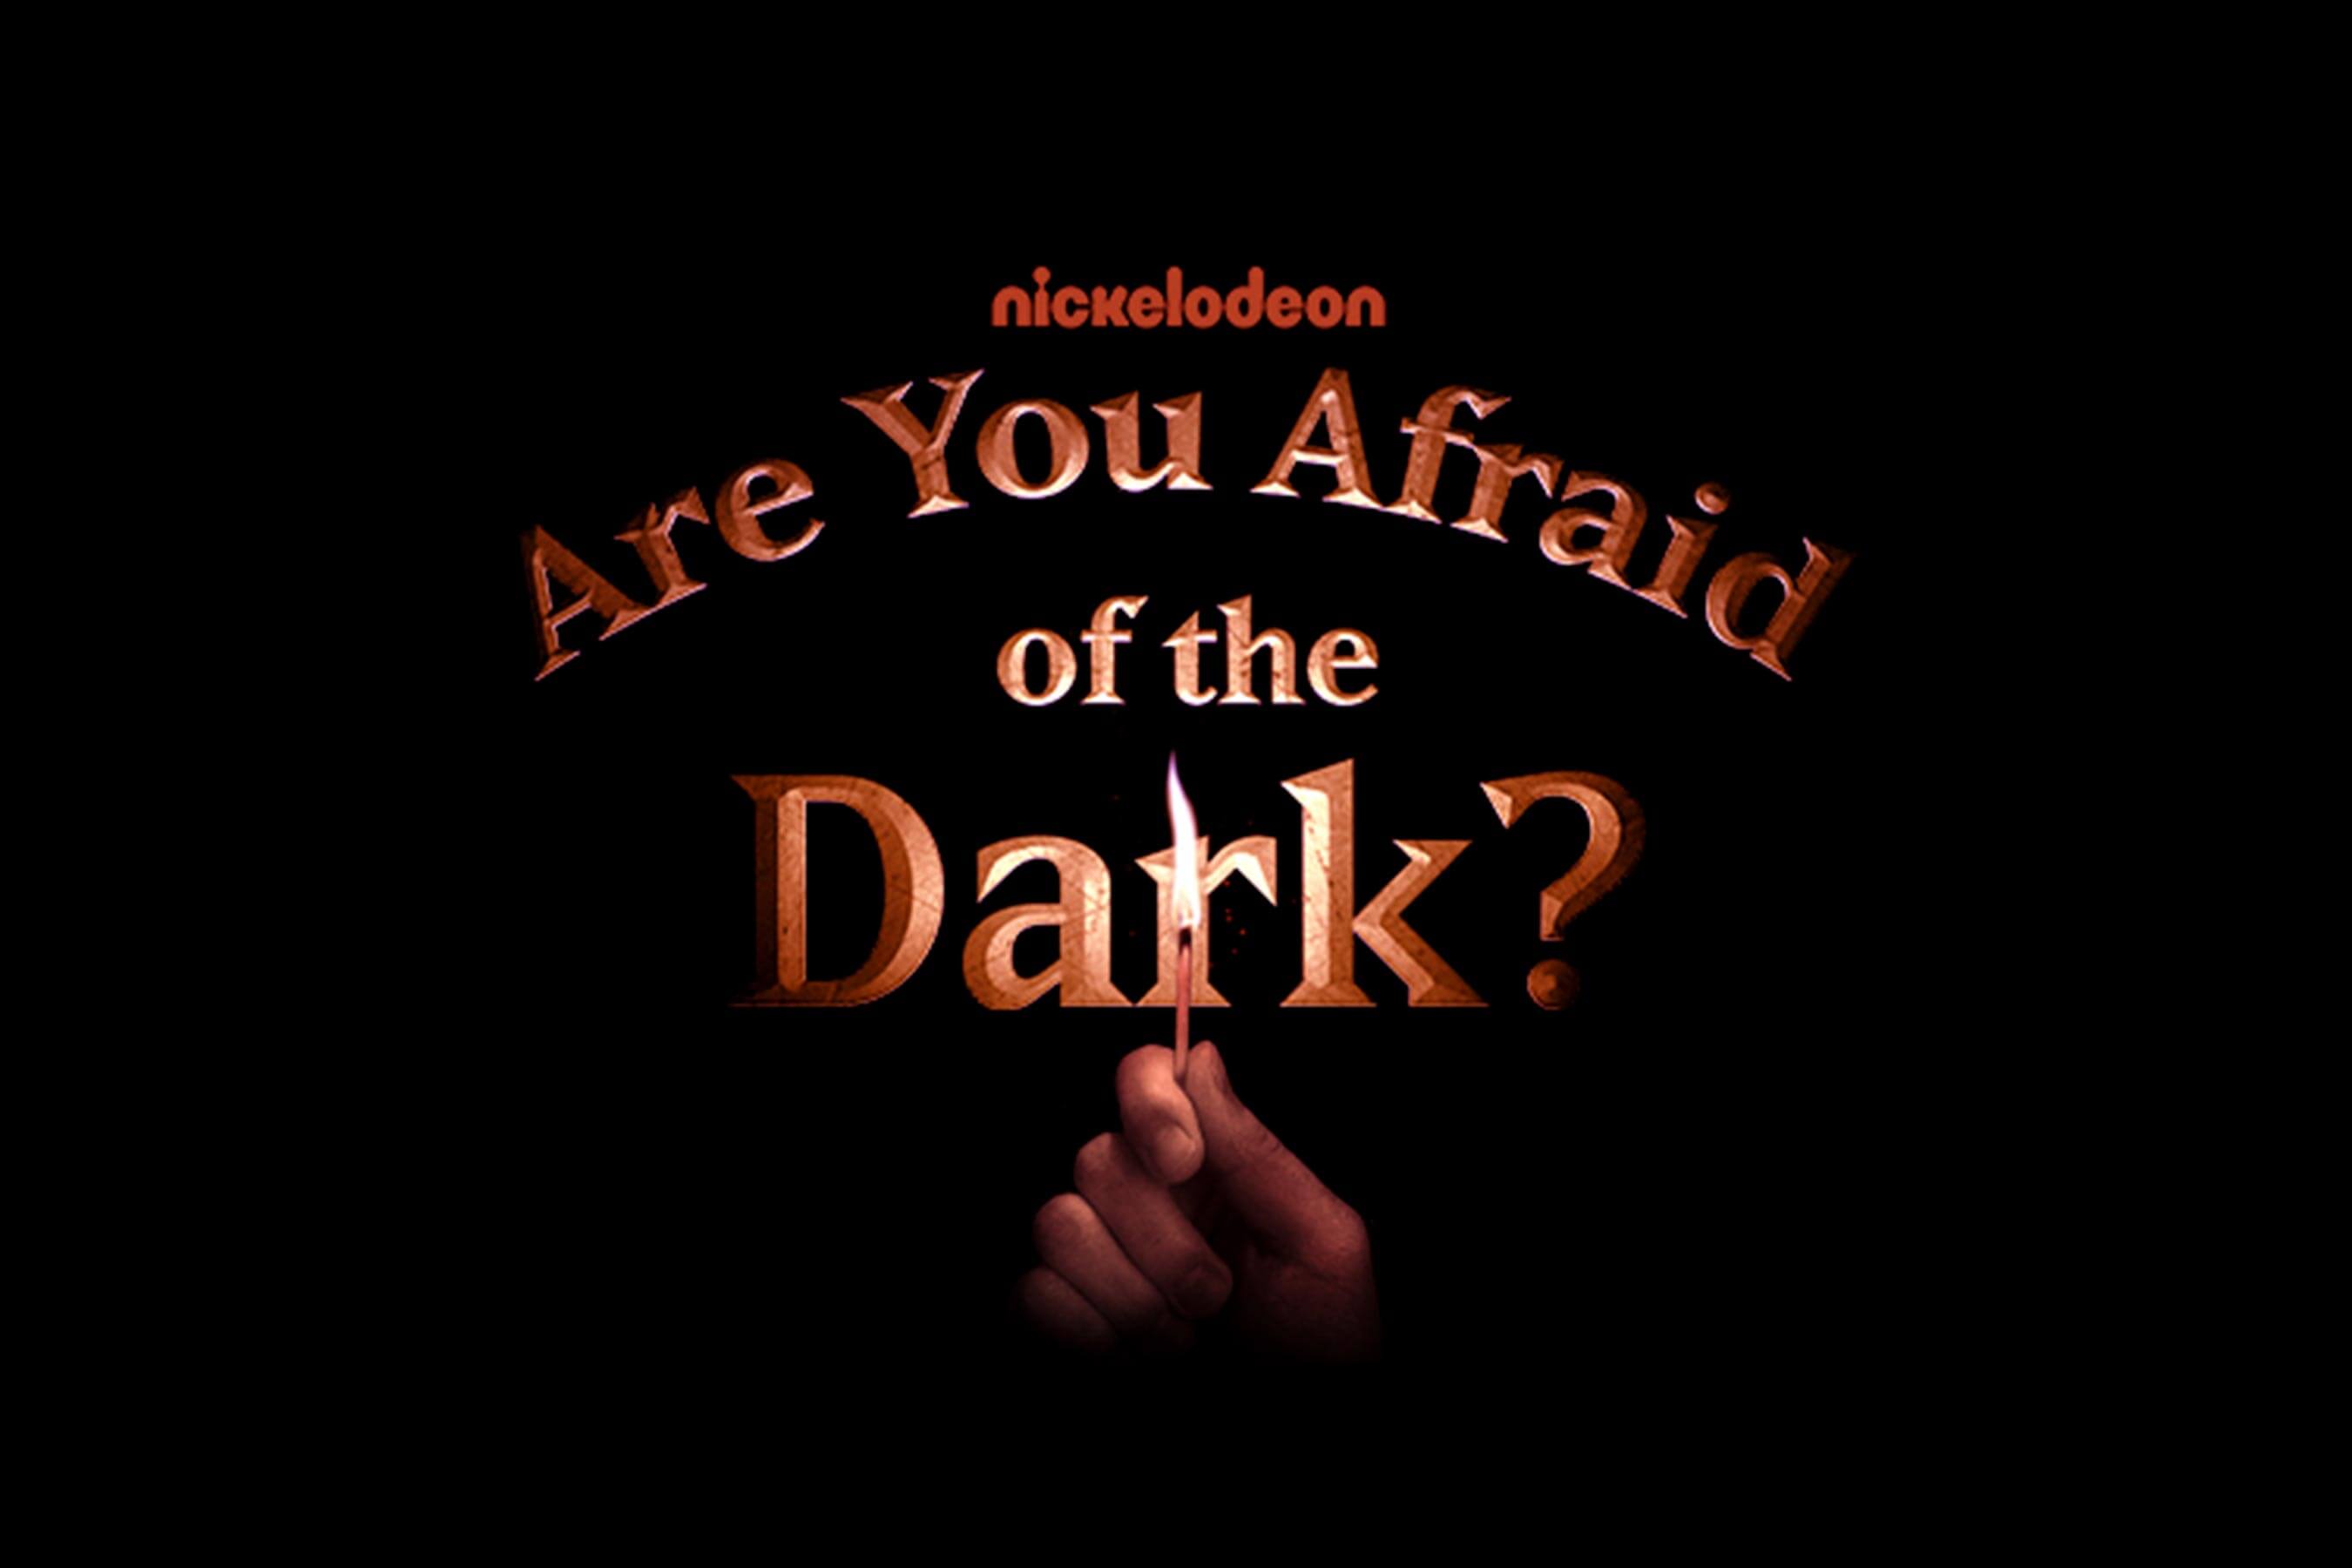 ARE YOU AFRAID OF THE DARK?